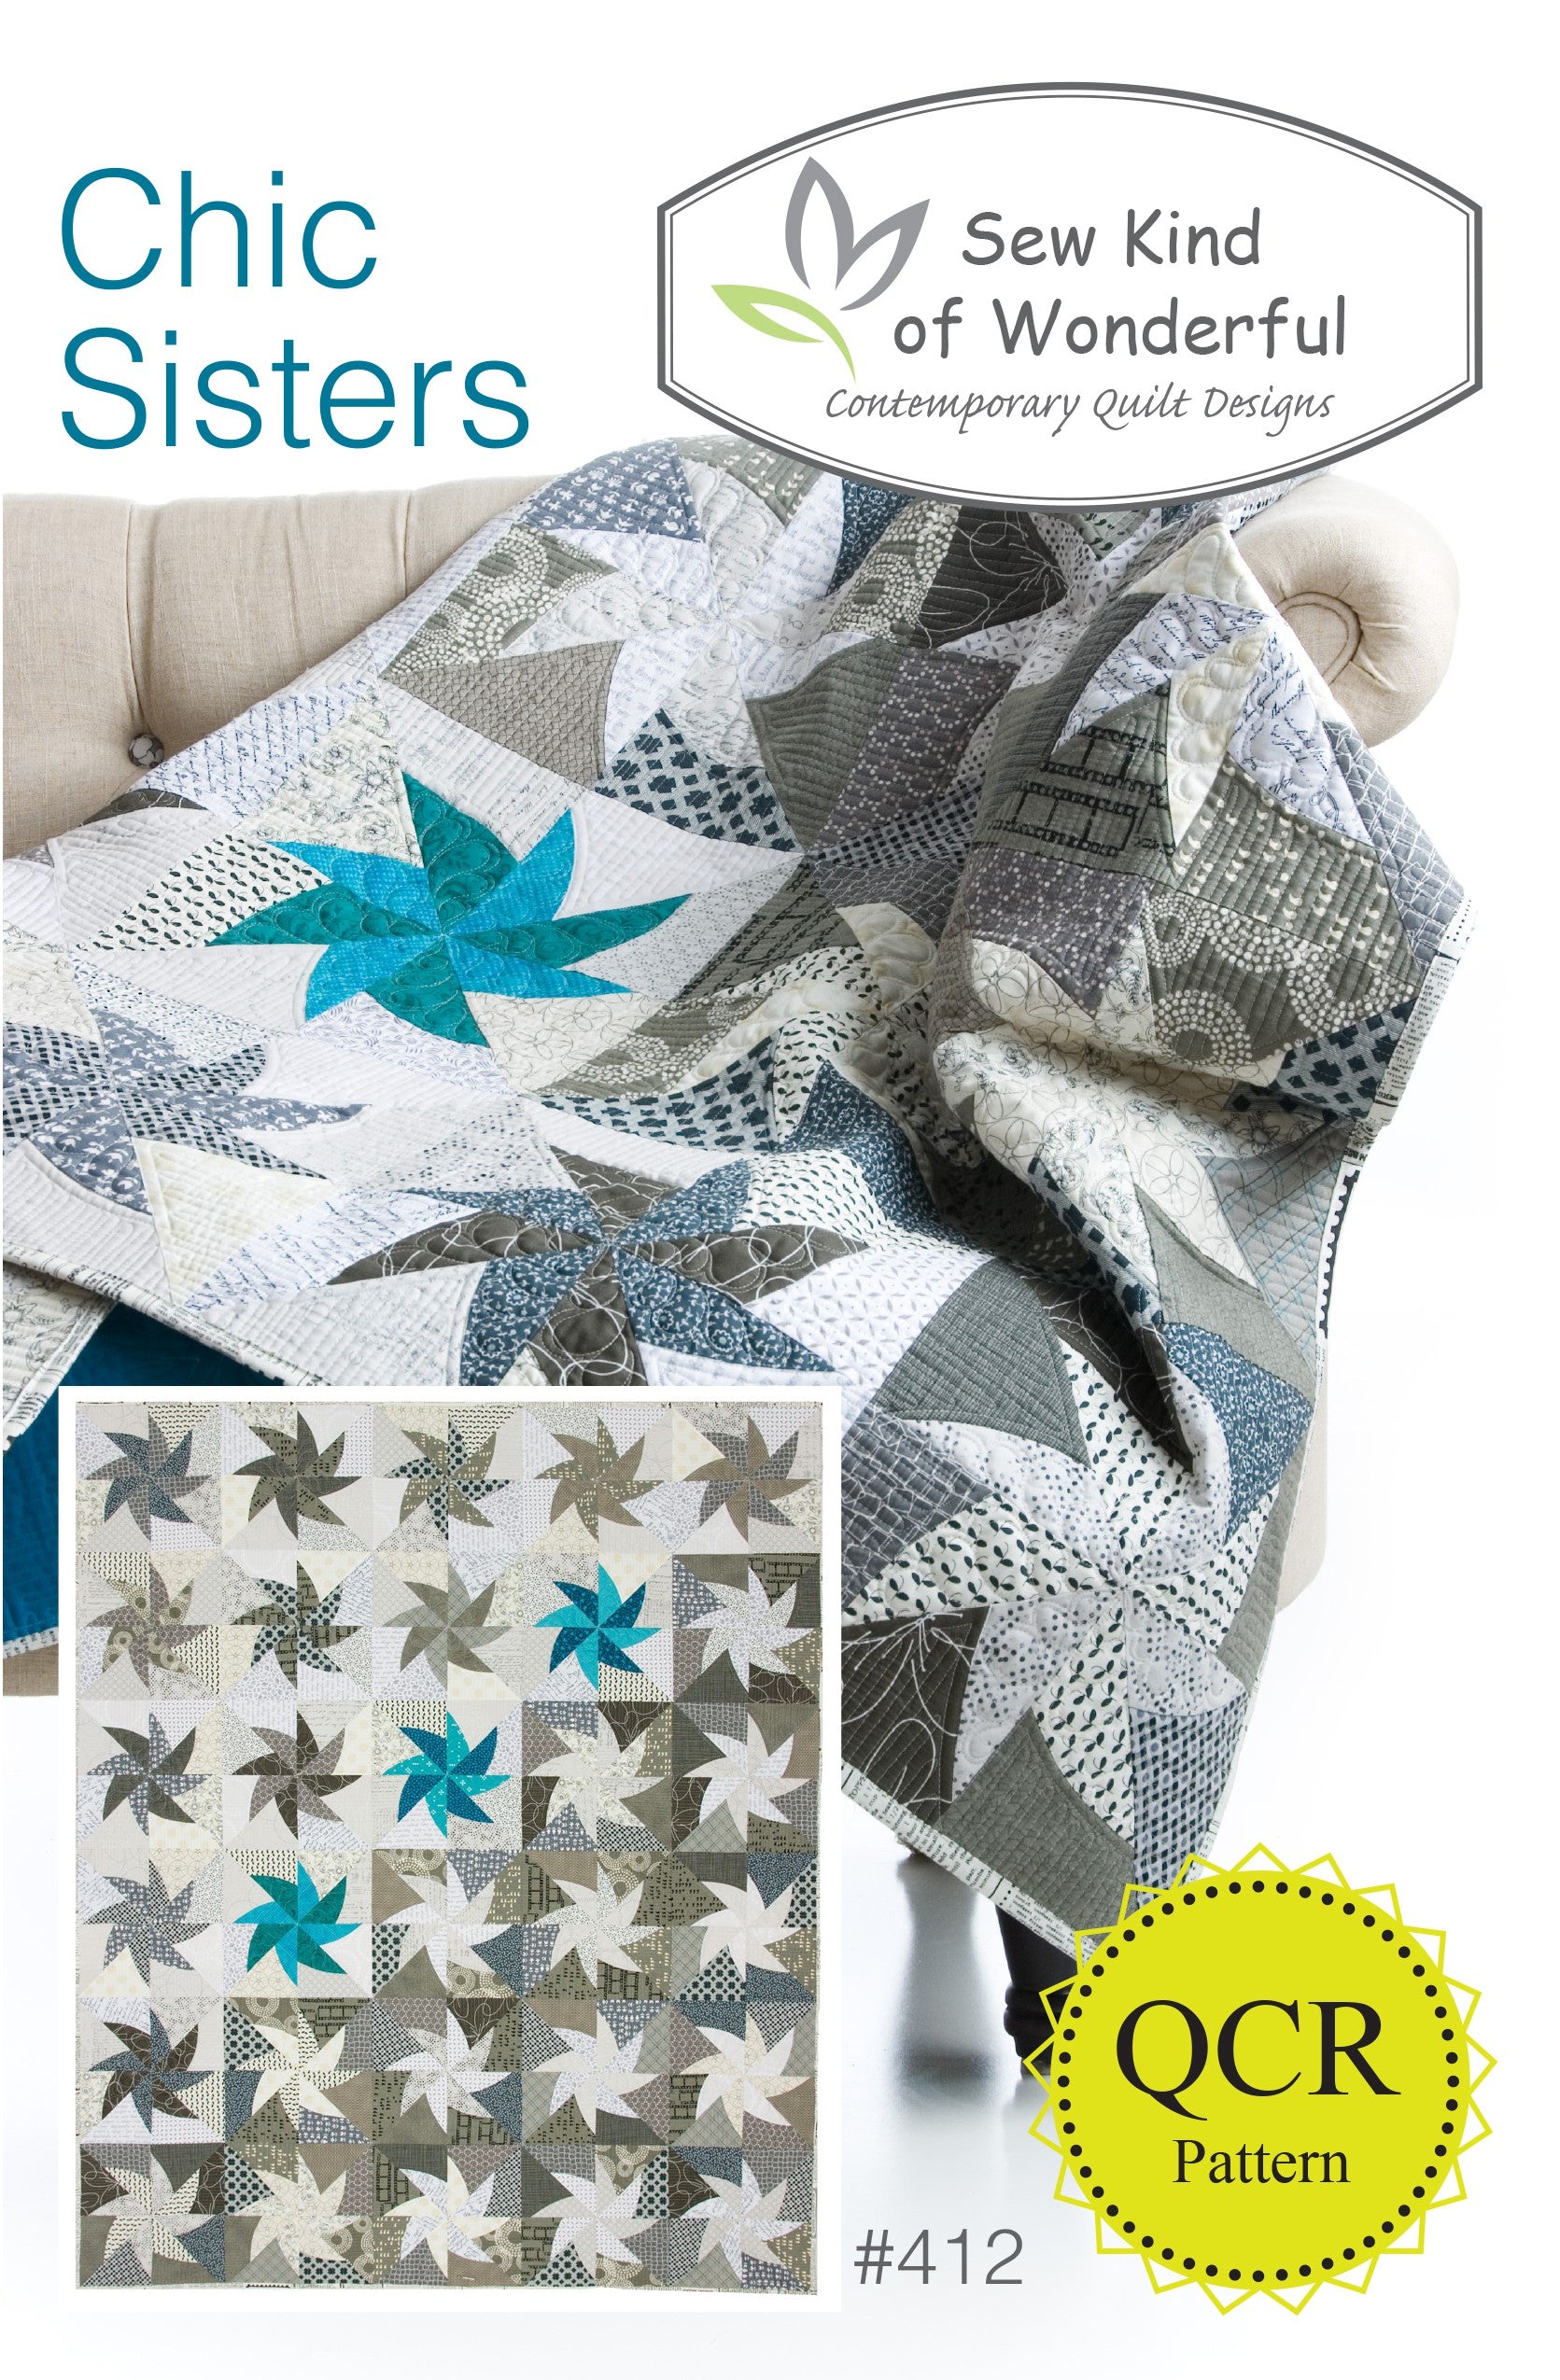 Chic Sisters Quilt Pattern by Jenny Pedigo of Sew Kind of Wonderful